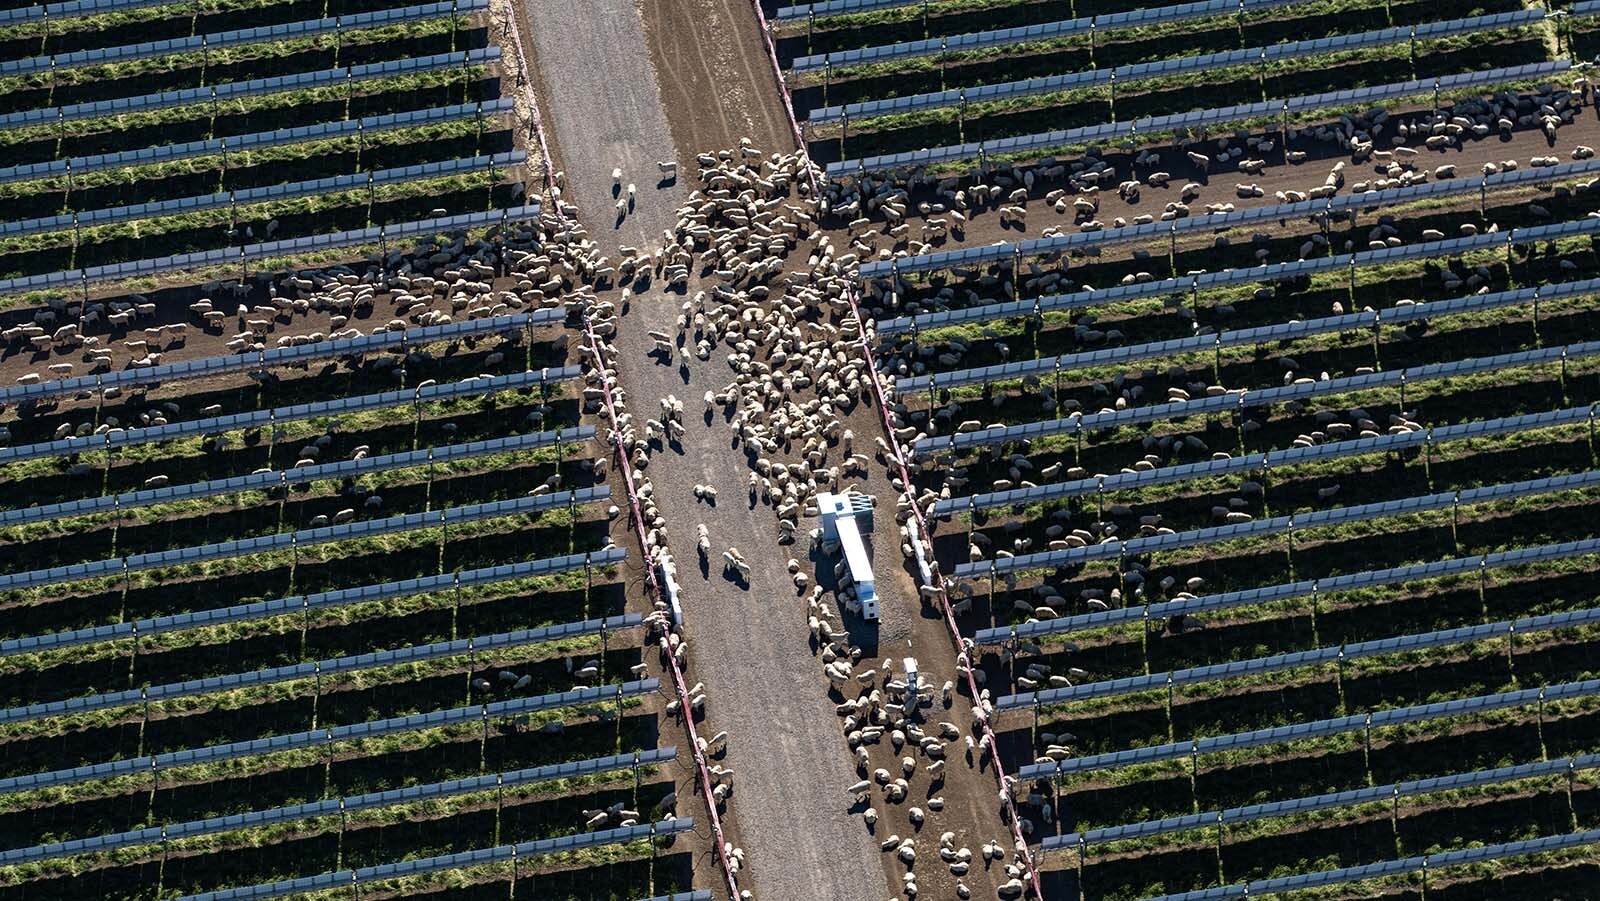 A large solar farm with raised panels that allow sheep to graze under them. A similar concept is proposed for a nearly 5,000-acre solar farm near Glenrock.